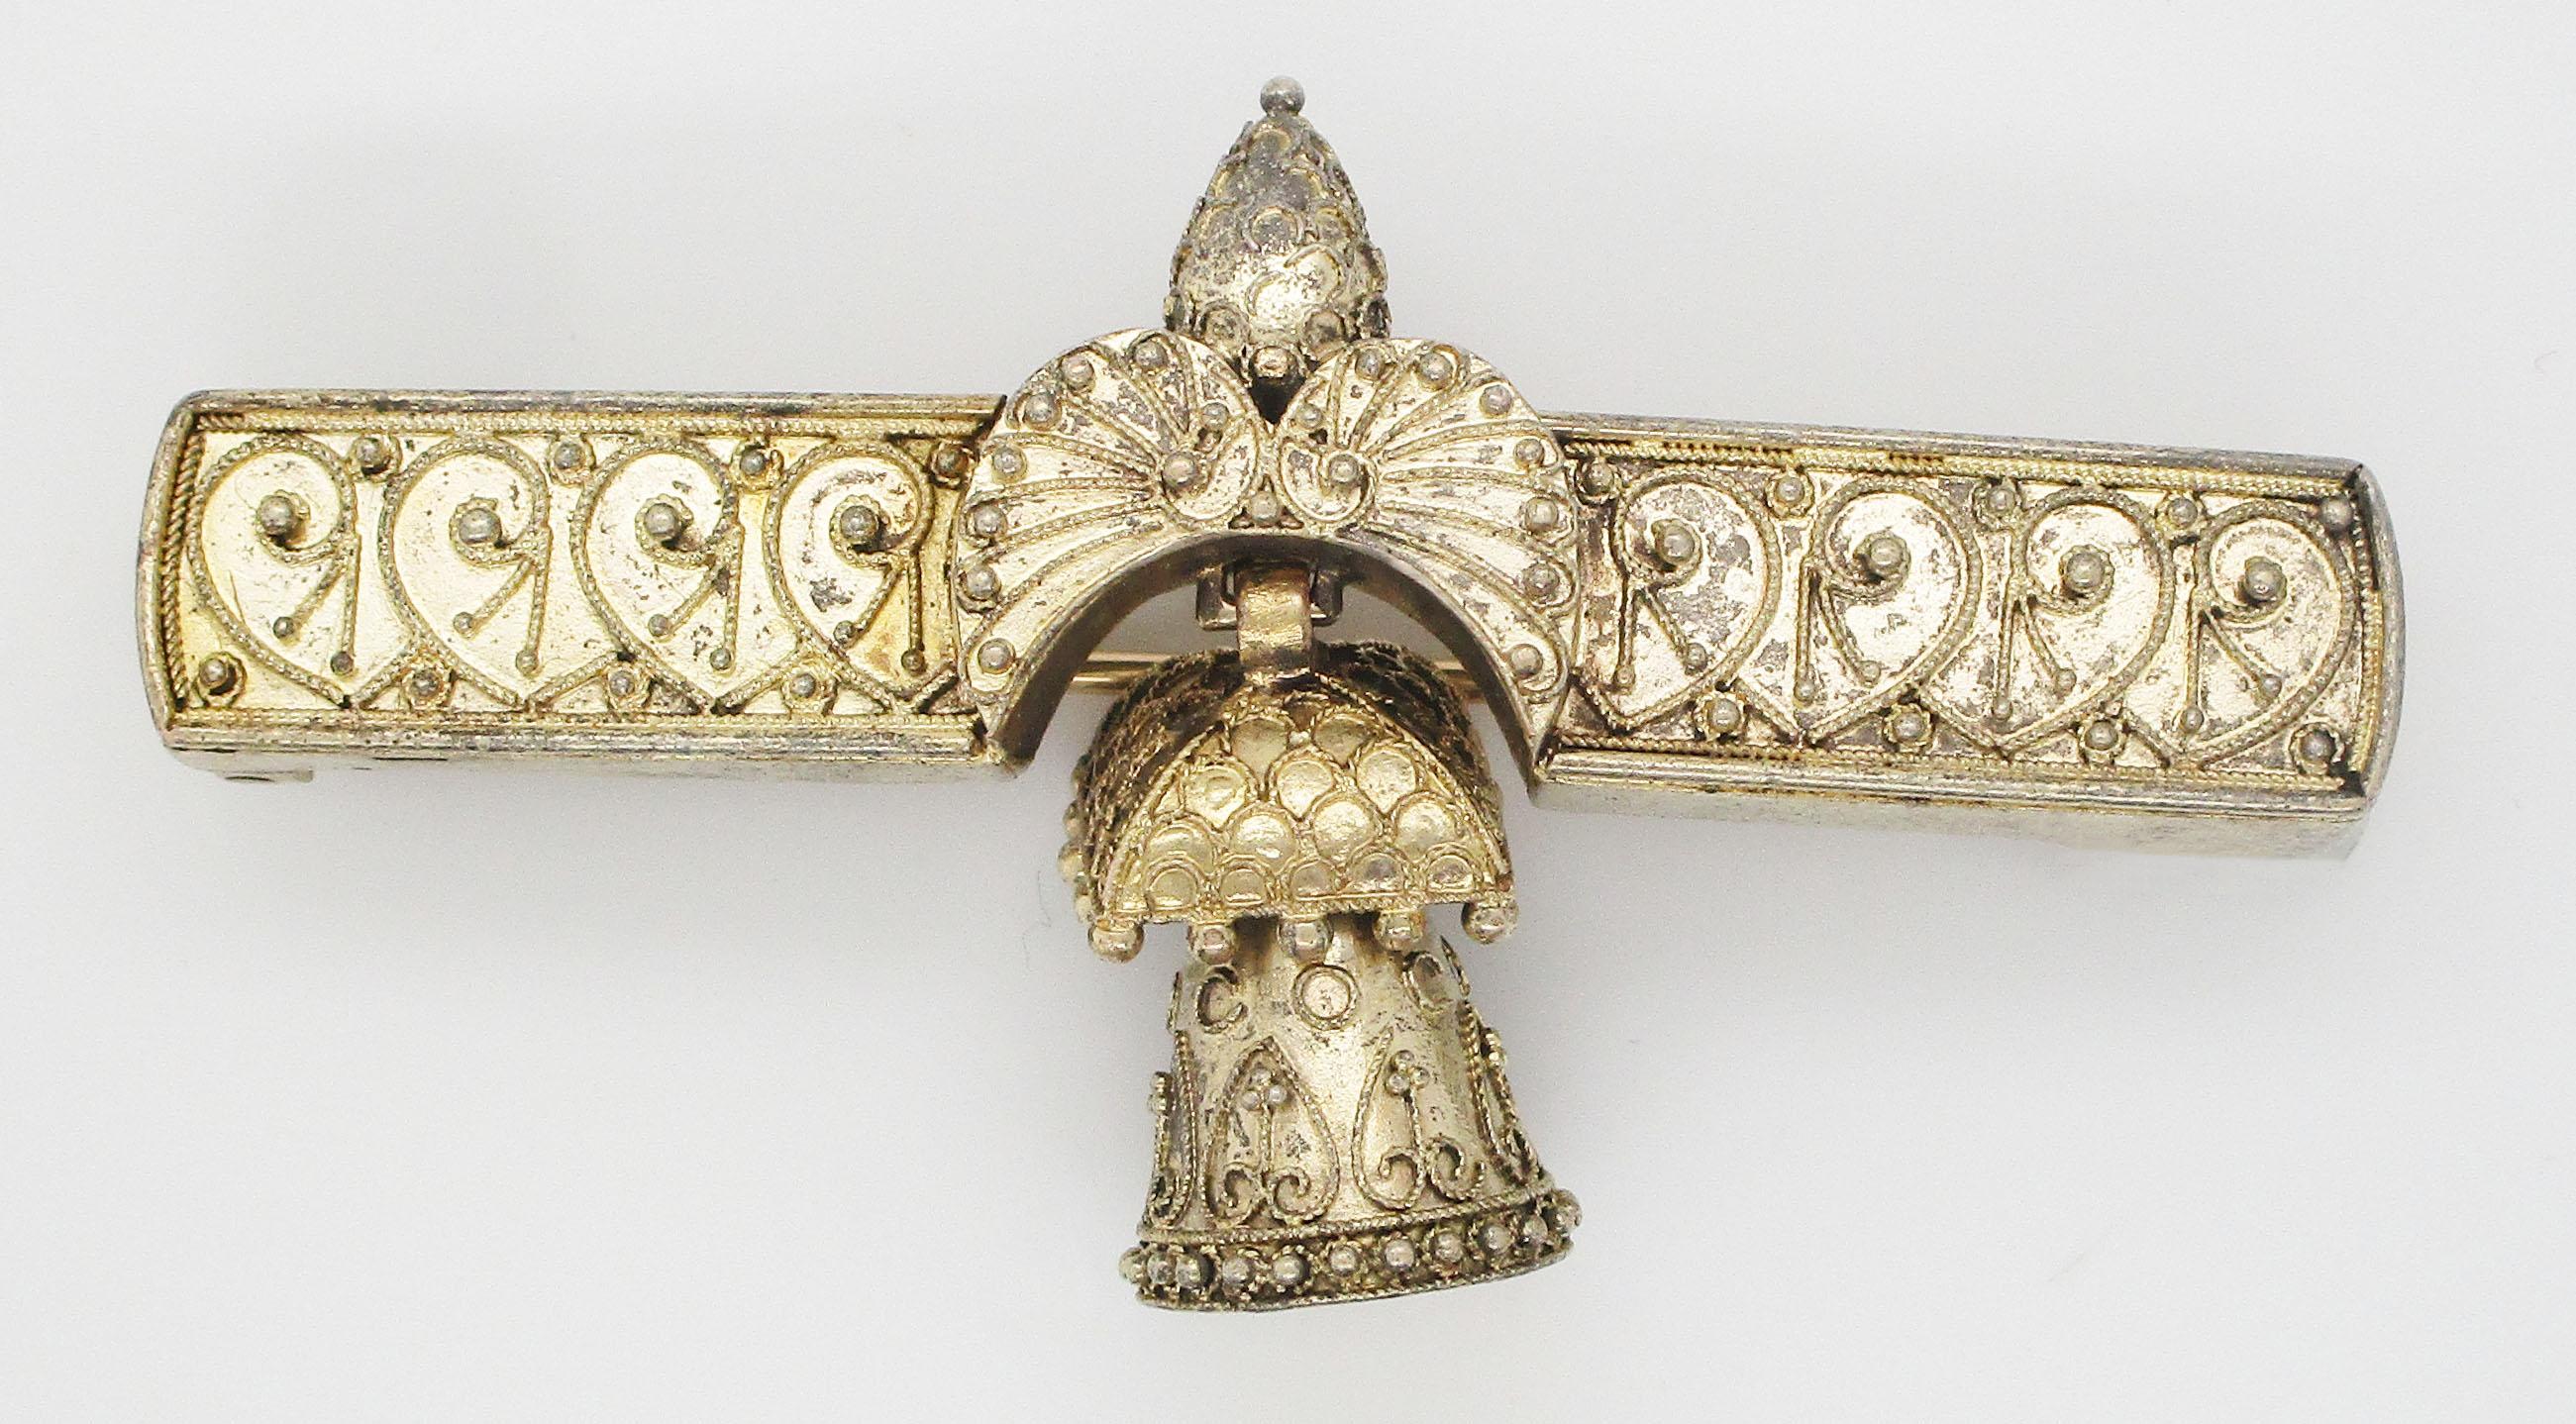 This remarkable Victorian Etruscan bar pin is in 14k yellow gold and has a stunning articulated bell dangle at its center! The bar pin has an incredible amount of fine detailing in subtle scrolling and a winged symbol overlay. The elegance and